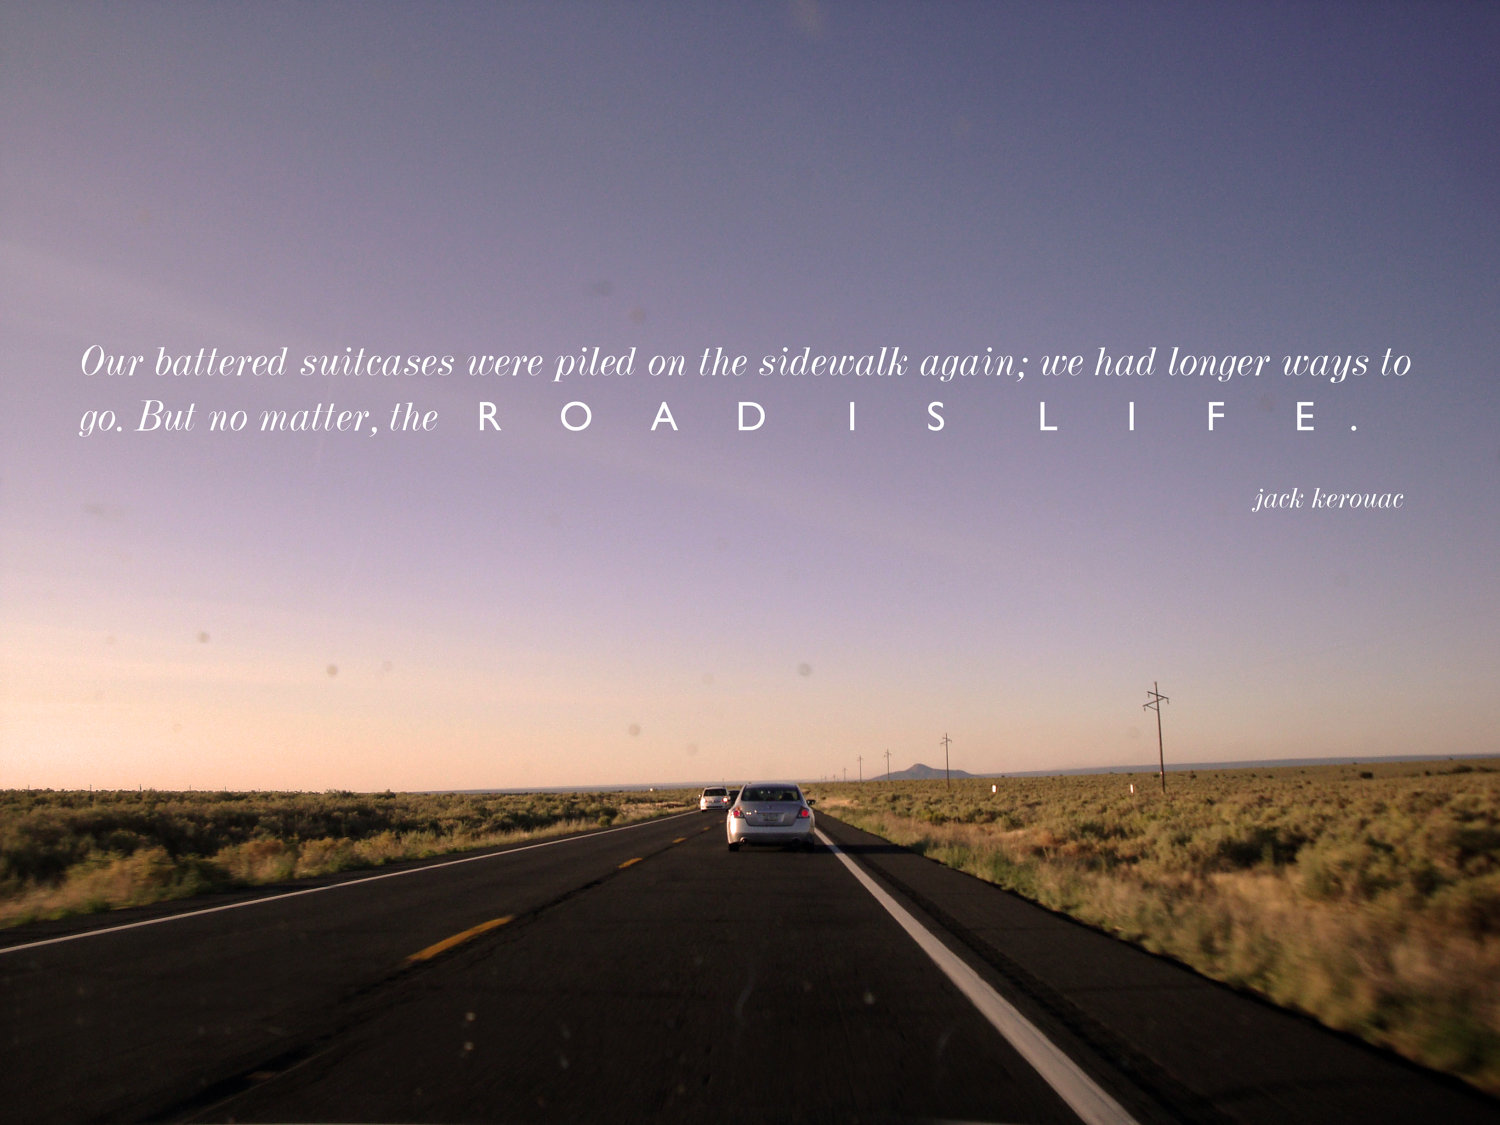 Road Quotes About Life. QuotesGram